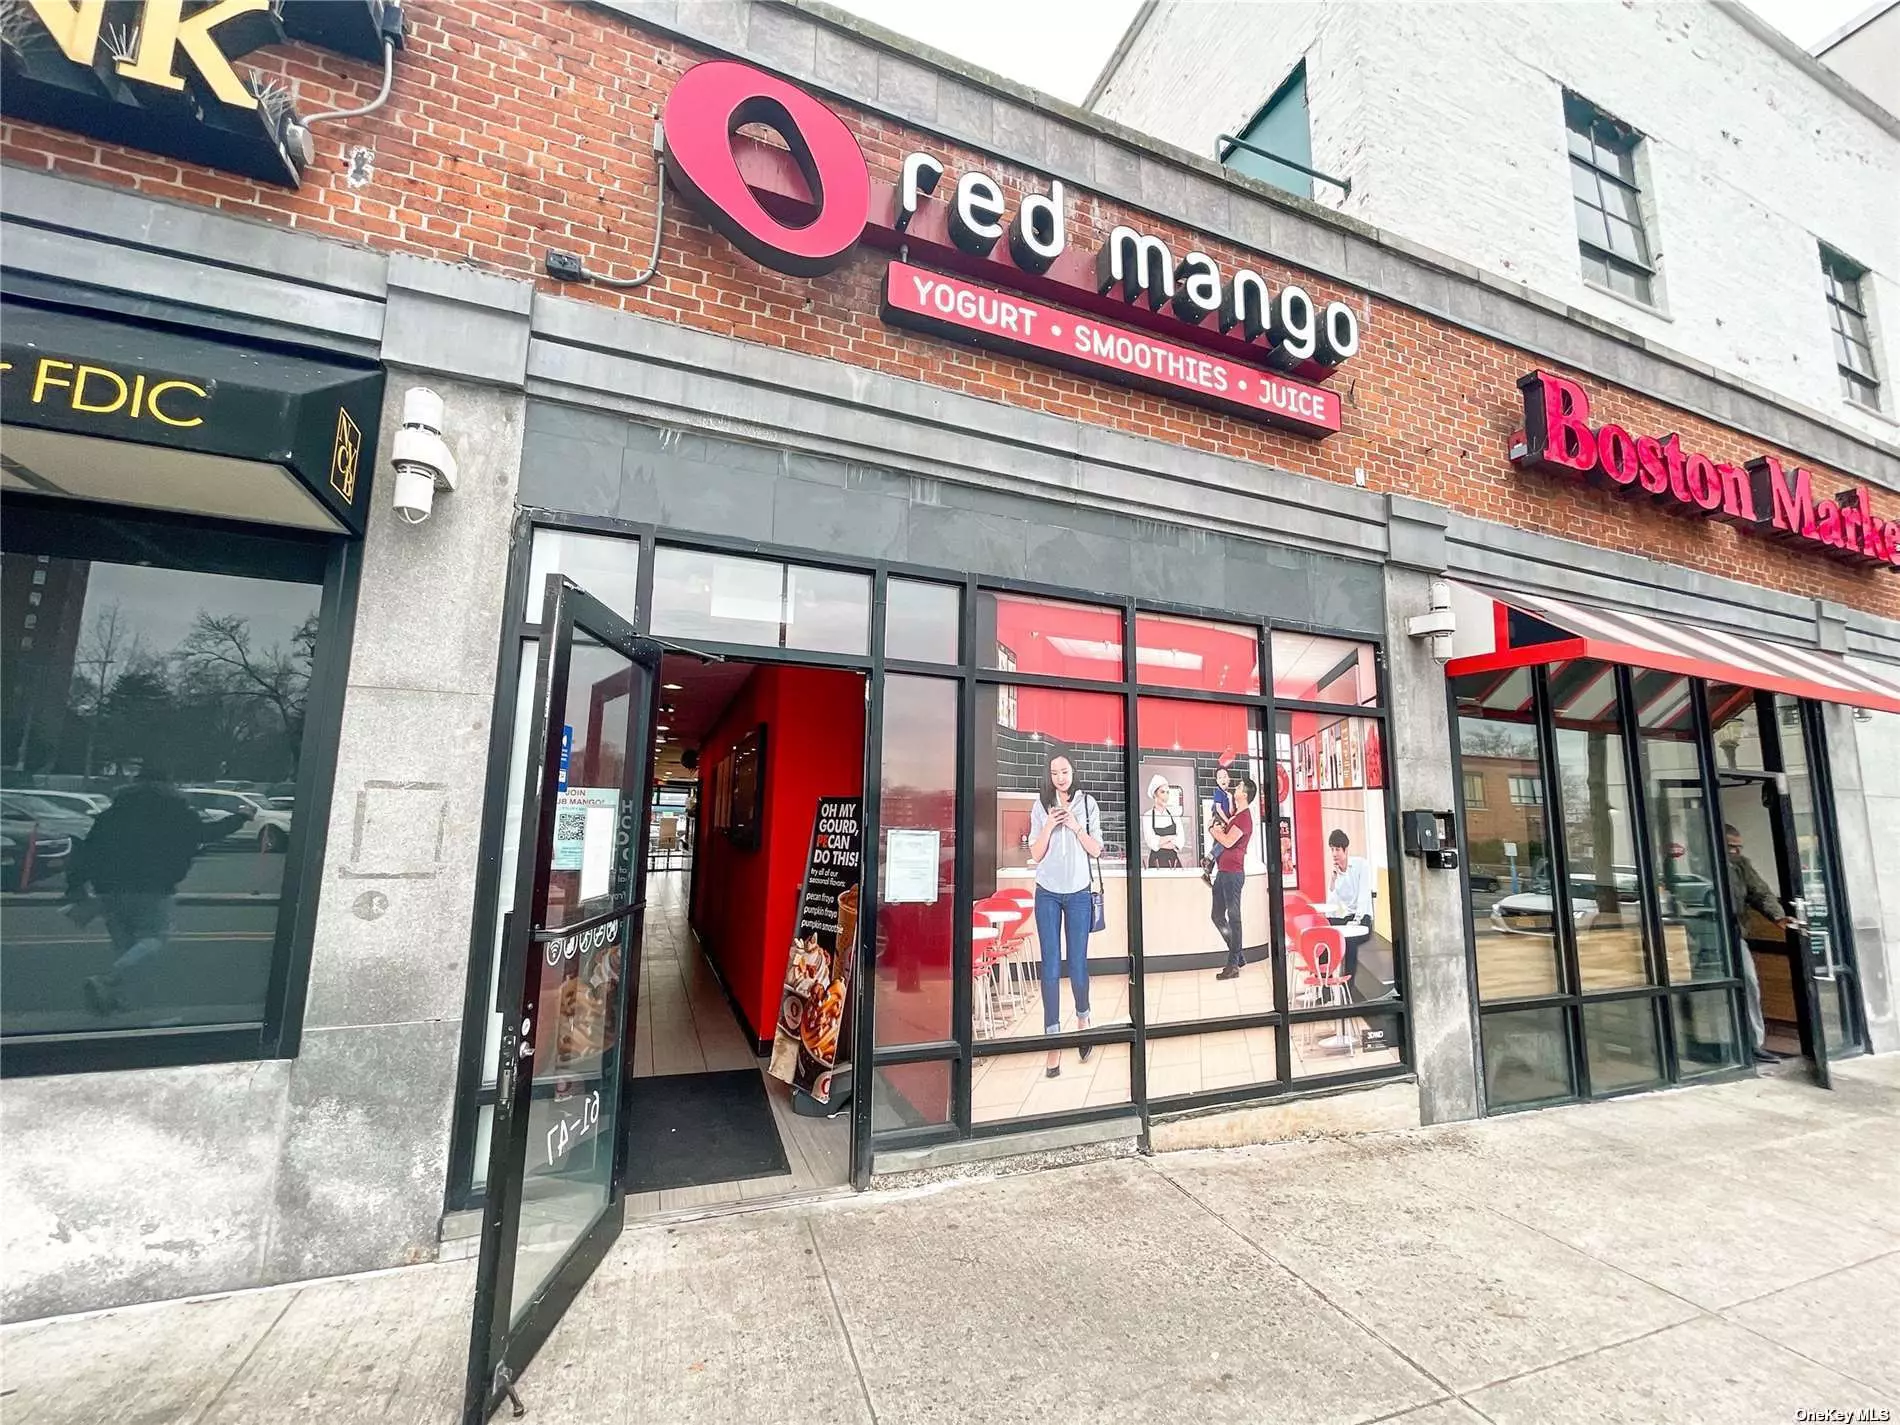 SWEETEST DESSERT SPOT DEAL $99, 000! Welcome to the sweetest business opportunity in Queens, NYC! If you&rsquo;re looking for a profitable and established franchise, then Red Mango Fresh Meadows is the perfect most ideal location and business with a thriving Red Mango Yogurt & Smoothies store in one of the most sought-after and vibrant neighborhoods of Fresh Meadows! With over 200 locations nationwide, Red Mango is a very popular franchise that offers an array of frozen yogurt flavors, smoothies, coffee, and all types of healthy options. This profitable Red Mango Franchise location has been established since 2008, with over 15 years in business. Located in the bustling Fresh Meadows Shopping Plaza on 188th St, this business offers a prime storefront location with excellent visibility and high foot traffic. Fresh Meadows Shopping Plaza features a massive parking lot and is anchored by nearby giants including Starbucks, Boston Market, Qdoba, FiveGuys, AppleBee&rsquo;s Grill + Bar, AT&T, CVS, KOHLS, HOOTERS, AMC, USPS Post Office and many more! Inside the store front is trendy and renovated with great aesthetics, while also providing ample square footage space for comfortable seating and an inviting atmosphere for customers to enjoy. The store has been well managed and consistent in generating revenue, grossing over $750K+ in sales for 2022 (a jump from $657K sales in 2021). Sale will include favorable lease renewal terms, all equipment owned (including 4 Taylor Water Cooled yogurt machines, commercial fridges, POS system and other equipment), and hands-on training for a smooth transition to new owners! Red Mango is a simple-to-run franchise concept with franchise royalties of only 6% of sales, and the marketing fee is just 3% of sales. You&rsquo;ll also get the benefit of a major brand with all their ad spend, promotions, and marketing initiatives done for you to drive continuous business growth! The business owner has spent and invested over $300K+ for build out, franchise fees, and equipment for this storefront. This sale isn&rsquo;t just about the well-established franchise business - it&rsquo;s also about location and community! Fresh Meadows is a vibrant, diverse community that celebrates local businesses and values quality products and services. This Red Mango yogurt store in this neighborhood is a beloved gathering place for families, students from elementary, middle school, Franchise Lewis High School, St. Francis Prep, ST Johns U, and professionals alike. Plus, with a growing demand for healthy, delicious options, the industry has seen steady growth. An opportunity like this does not come often, and to get a store that is already established with a loyal customer base and ideal location is a rarity. If you&rsquo;re an entrepreneur looking to take advantage of a proven business model, a supportive franchisor, and a prime location, then don&rsquo;t miss out on this sweet opportunity!